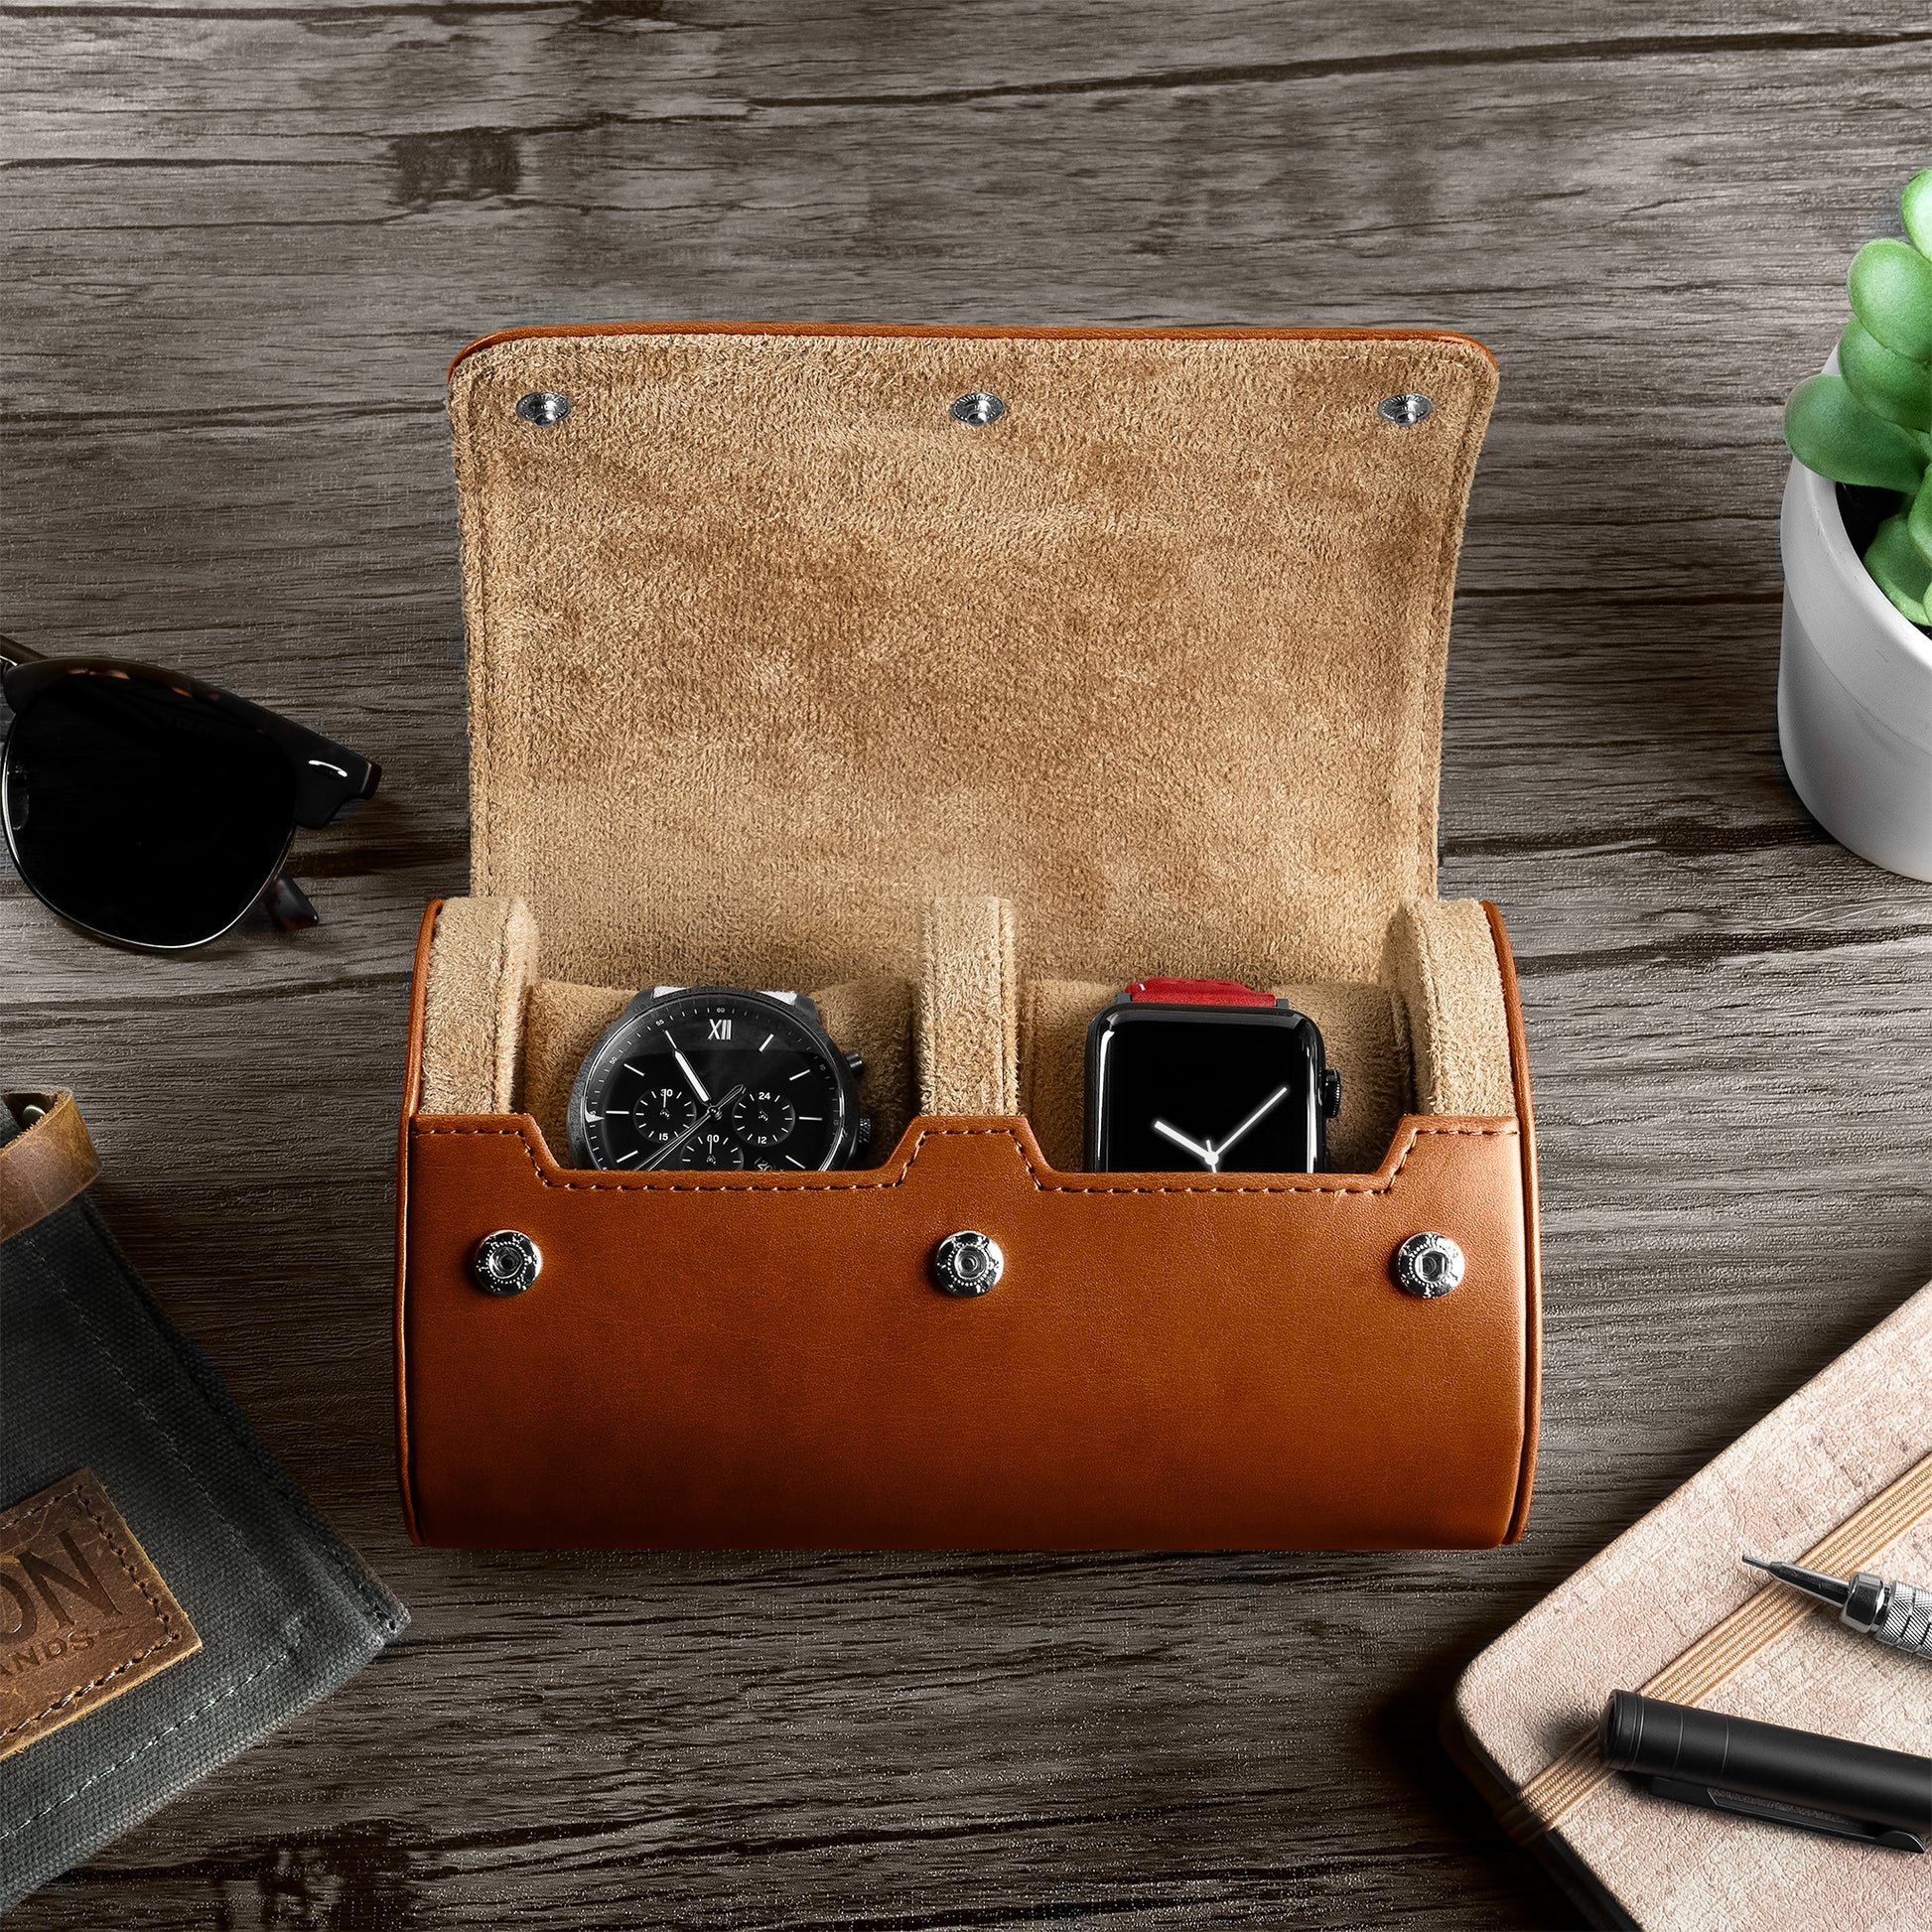 Barton Watch Roll - Brown Recycled Leather Watch Travel Case & Watch Band Storage - 3 Watch Case